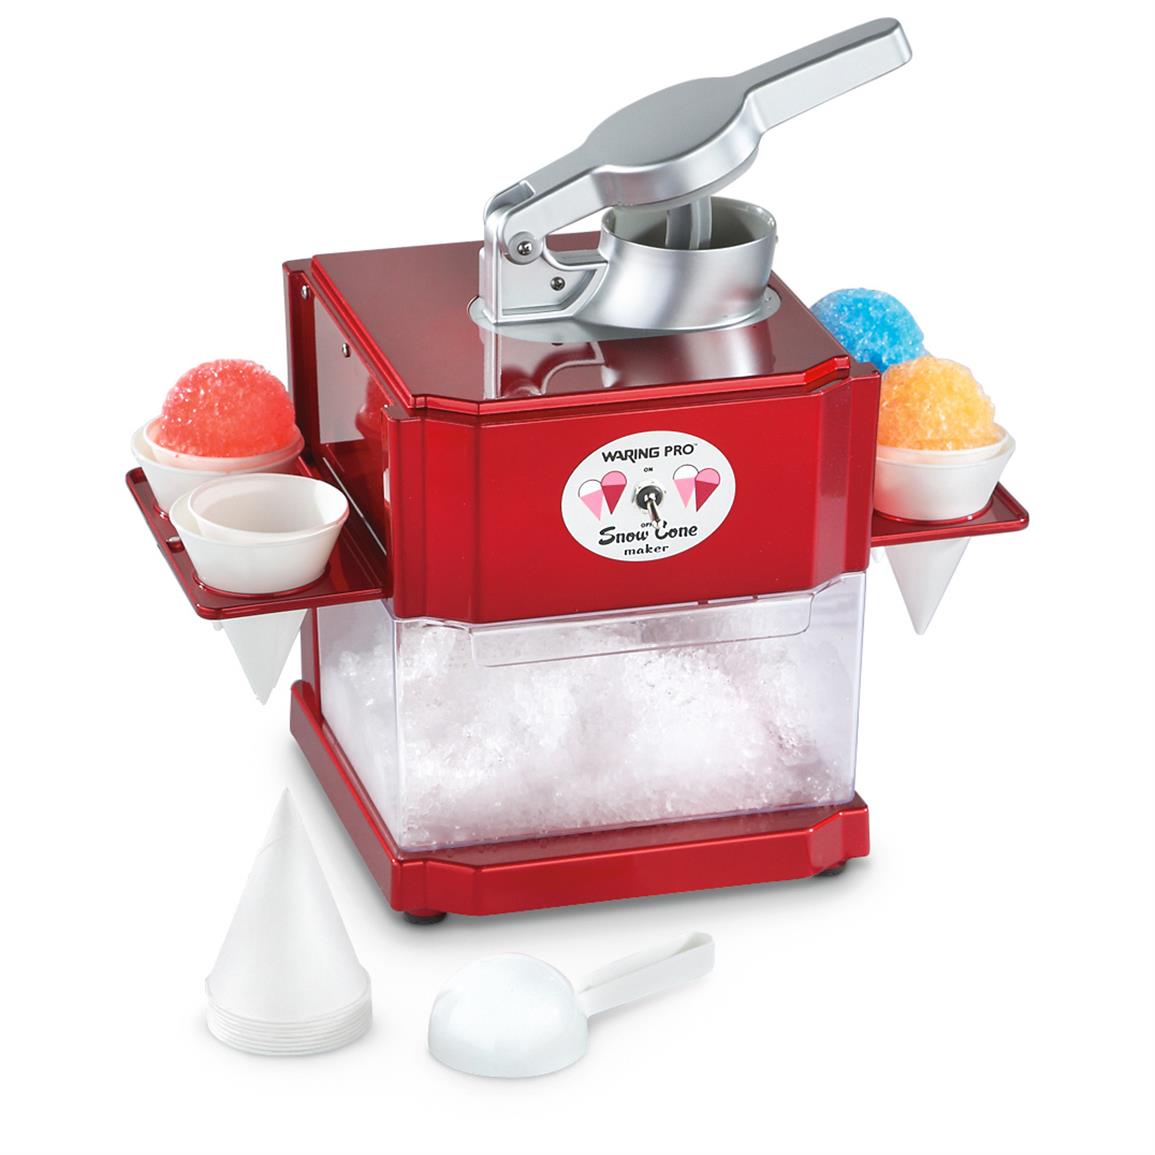 Waring Pro? Snow Cone Maker - 619671, Kitchen Appliances at ...